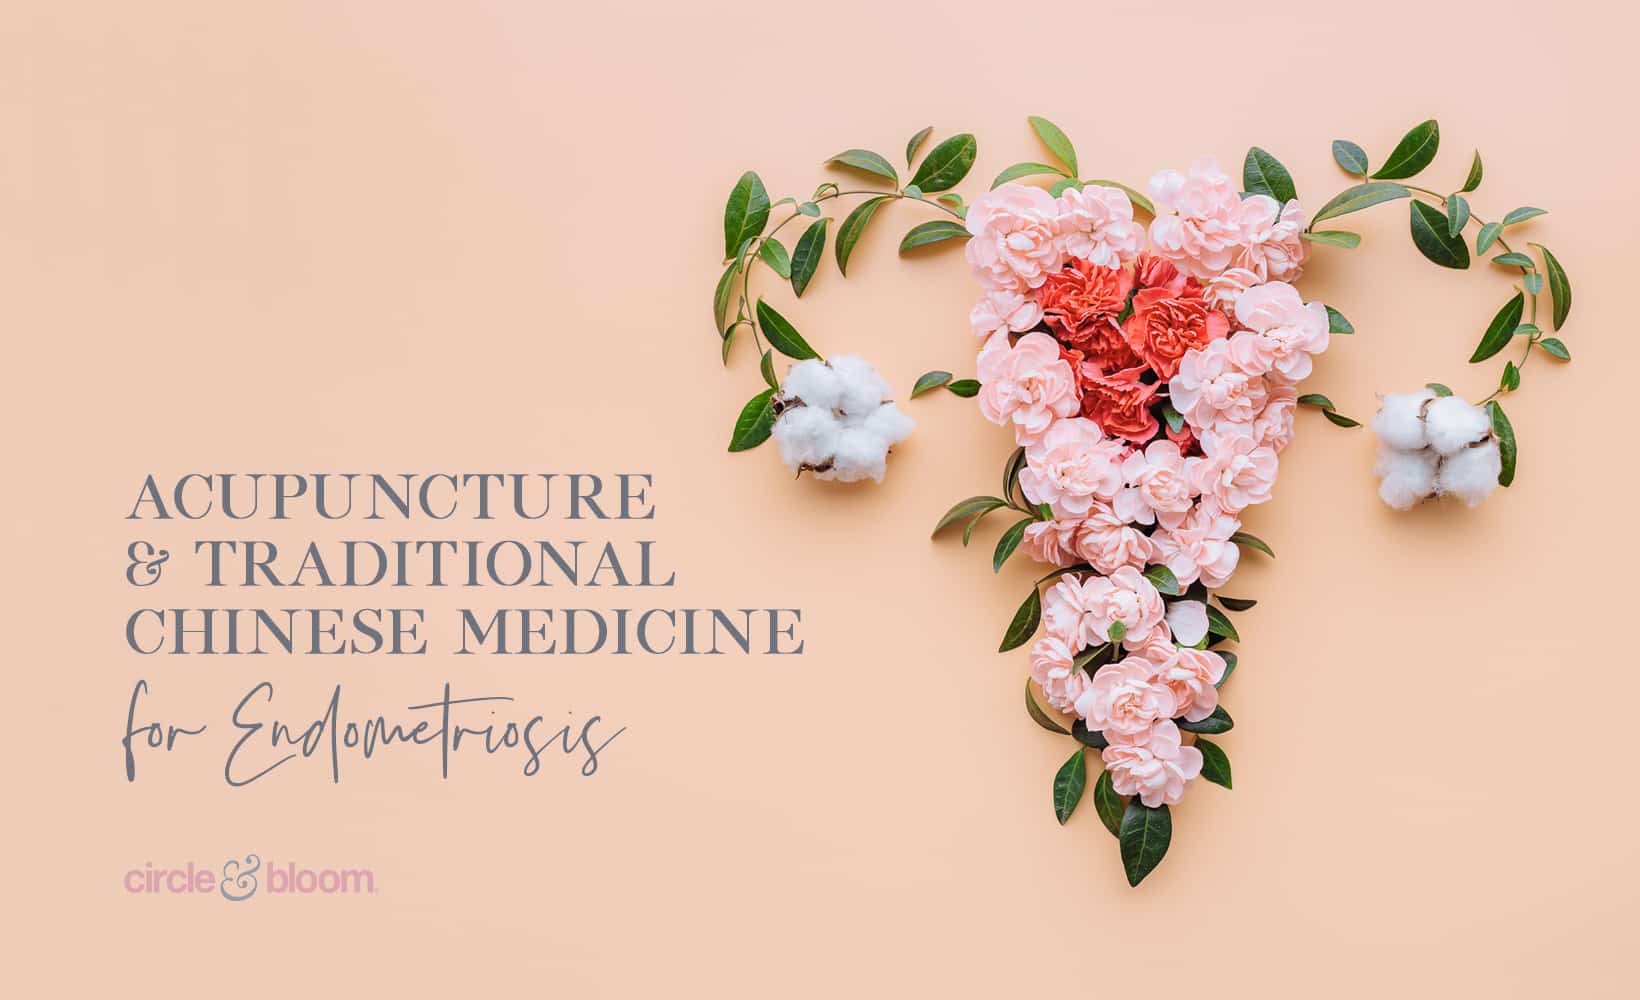 Acupuncture and Traditional Chinese Medicine for Endometriosis